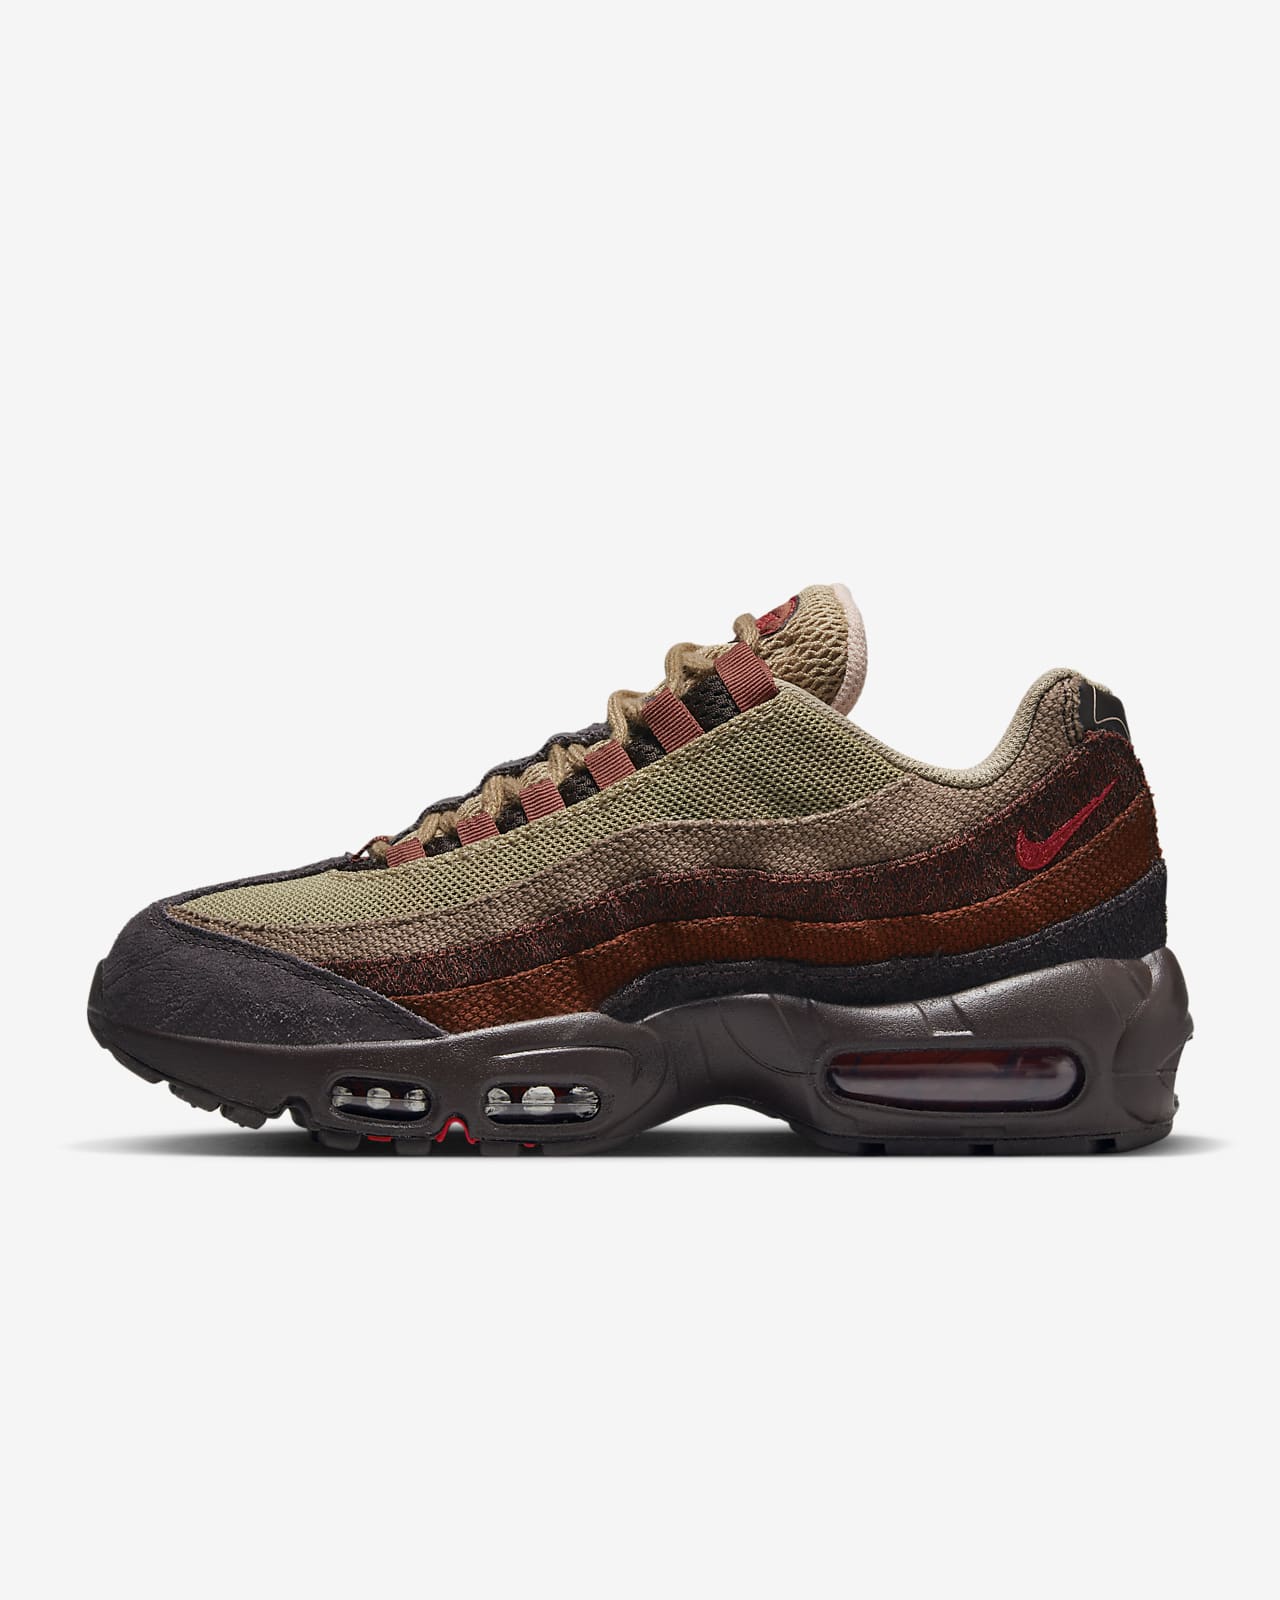 omhelzing Snazzy Archeoloog Chaussure Nike Air Max 95 pour Femme. Nike CA